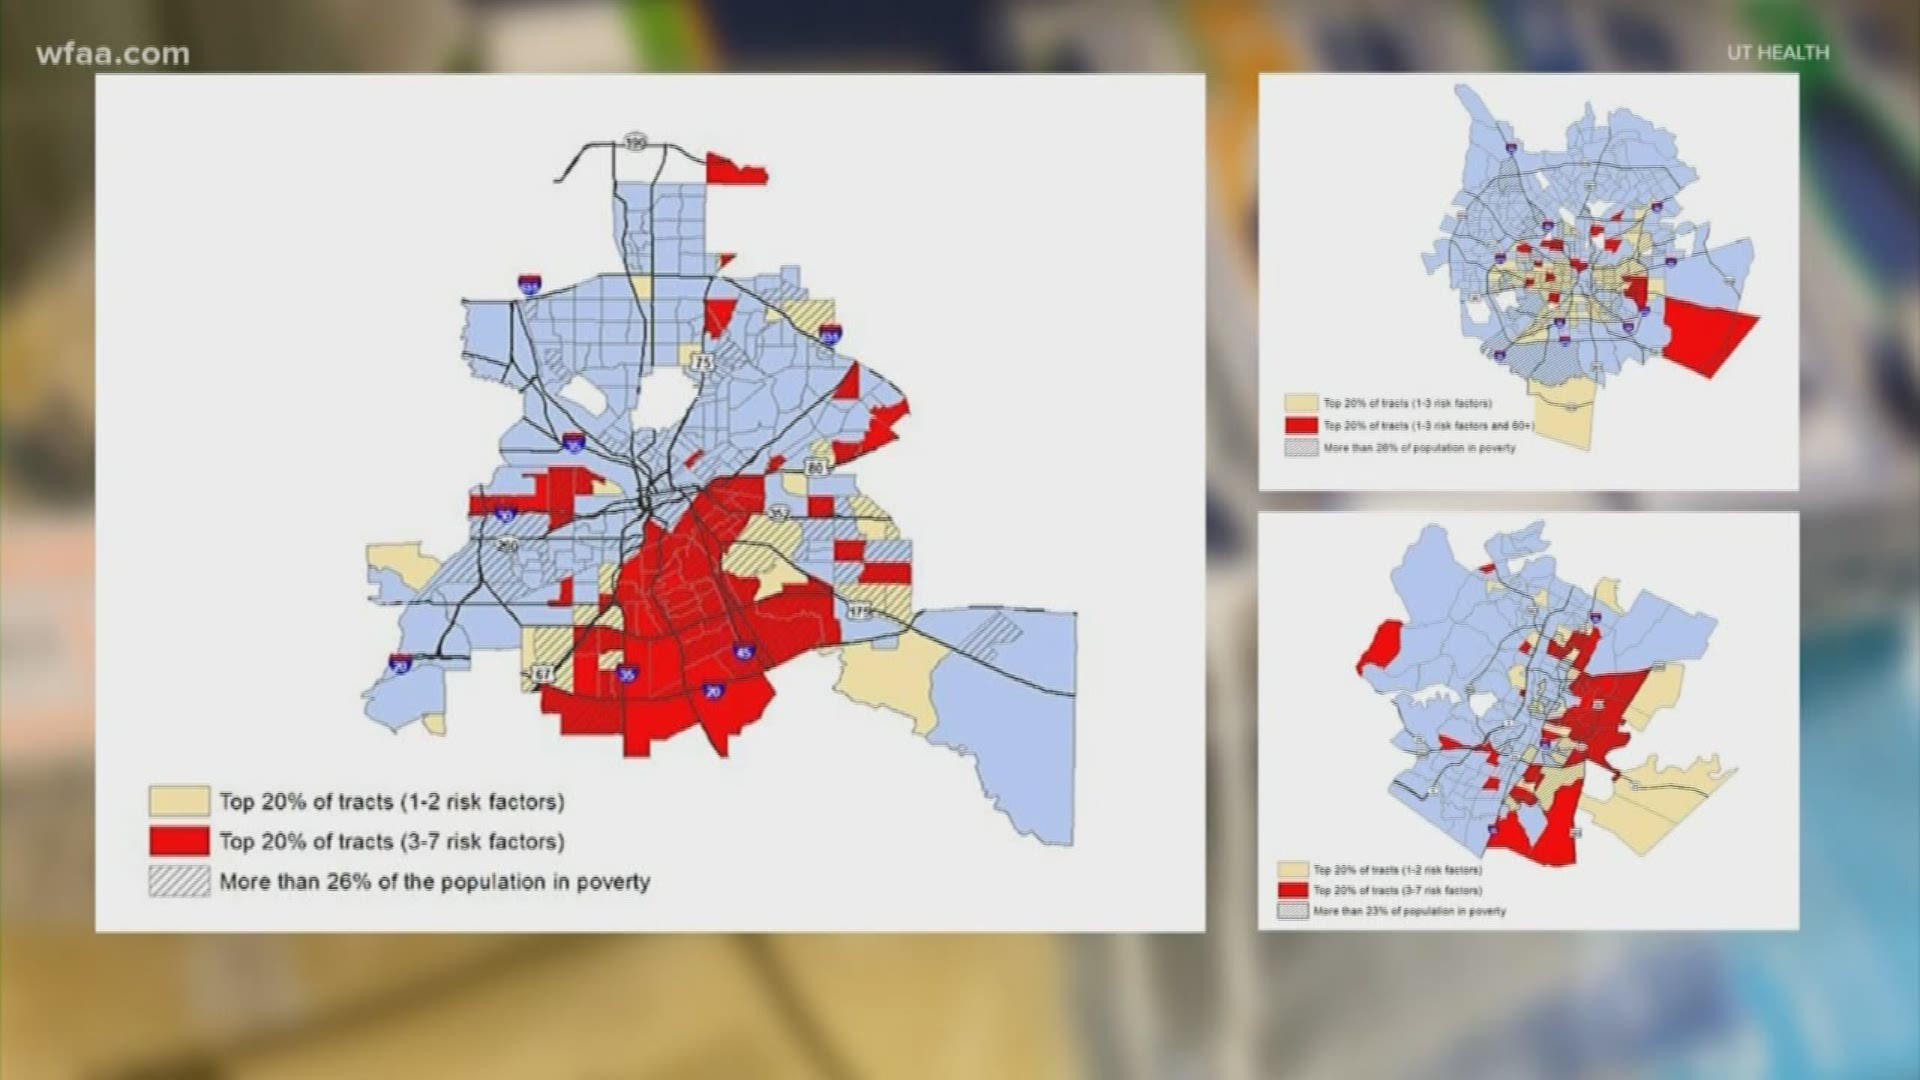 WFAA's Sonia Azad explains how certain areas of different Texas cities may experience higher levels of need when it comes to health care for COVID-19.